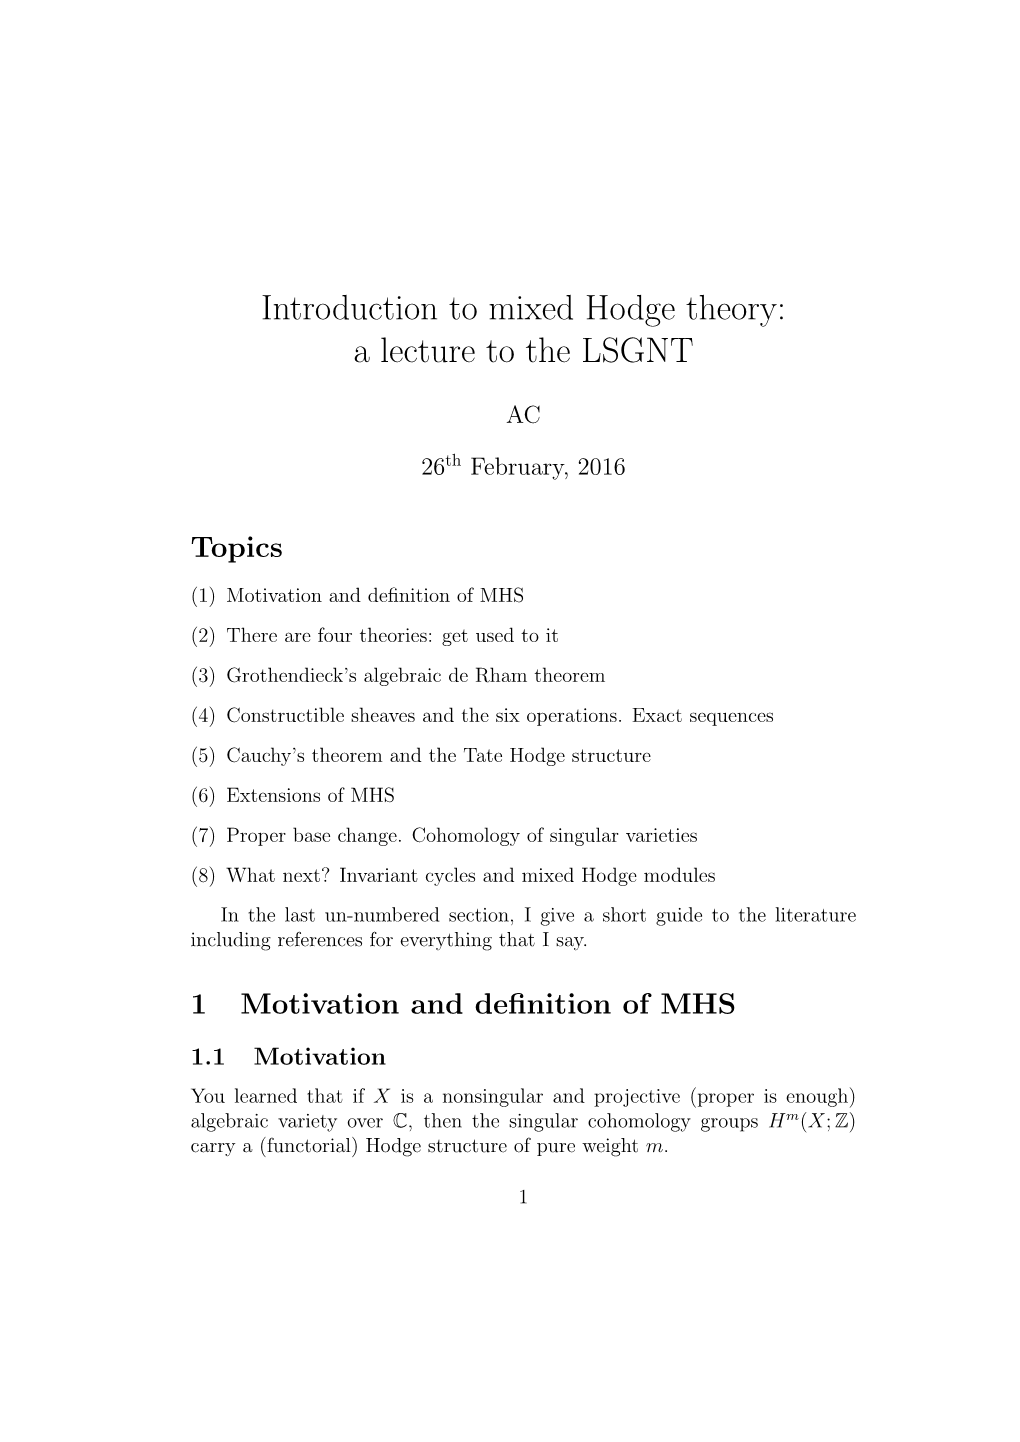 Introduction to Mixed Hodge Theory: a Lecture to the LSGNT